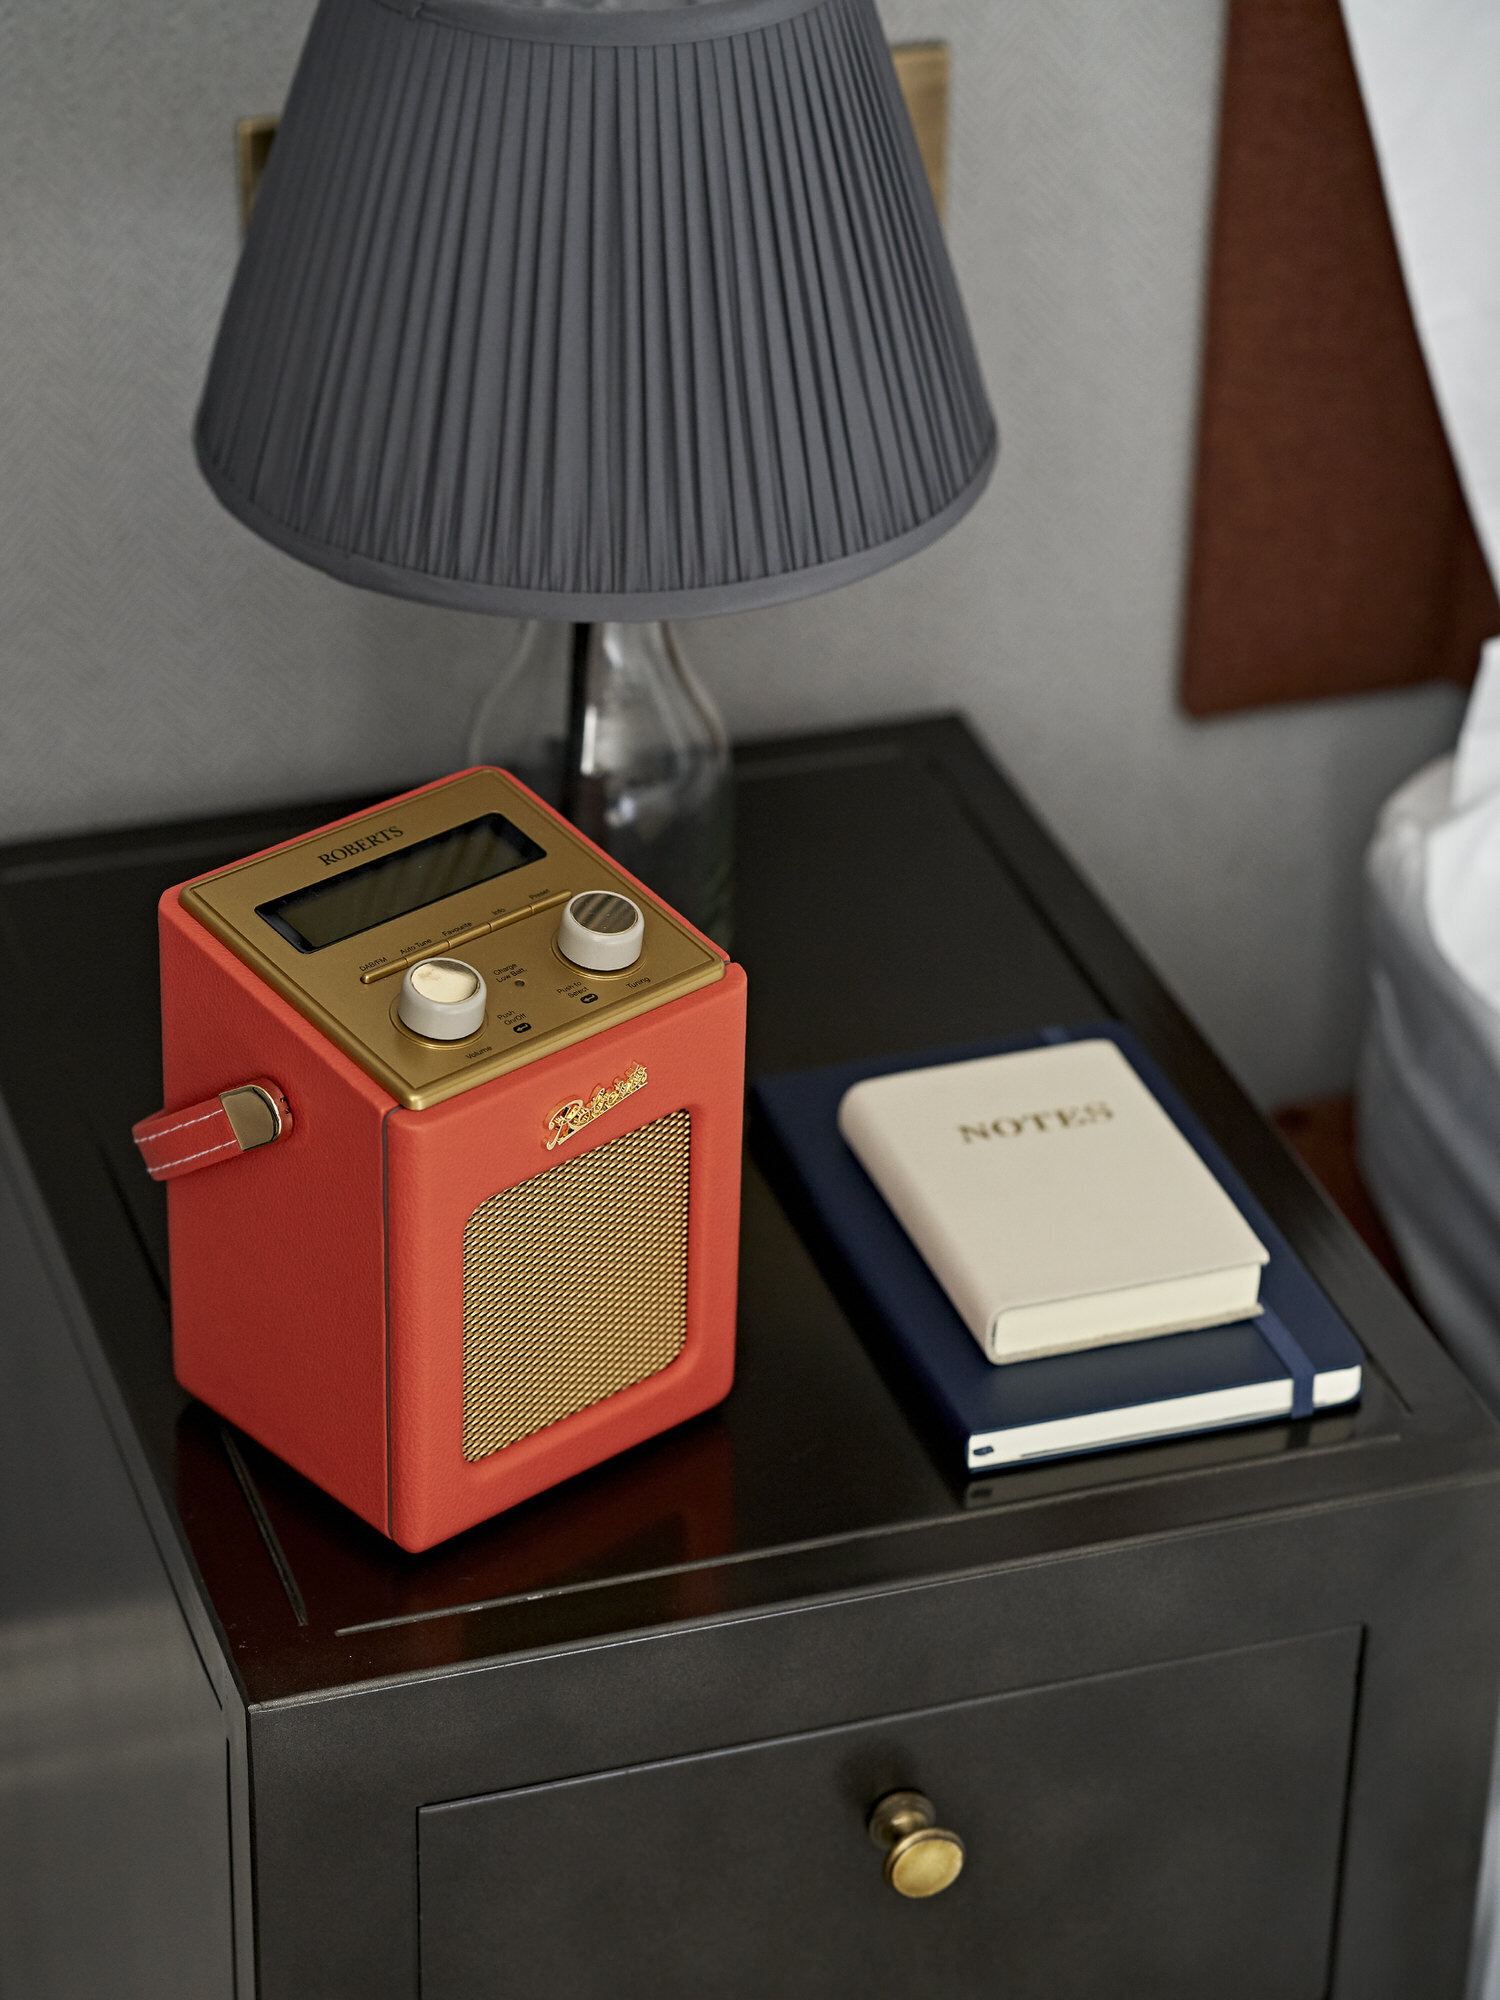 Bedside table detail with notebooks and red radio